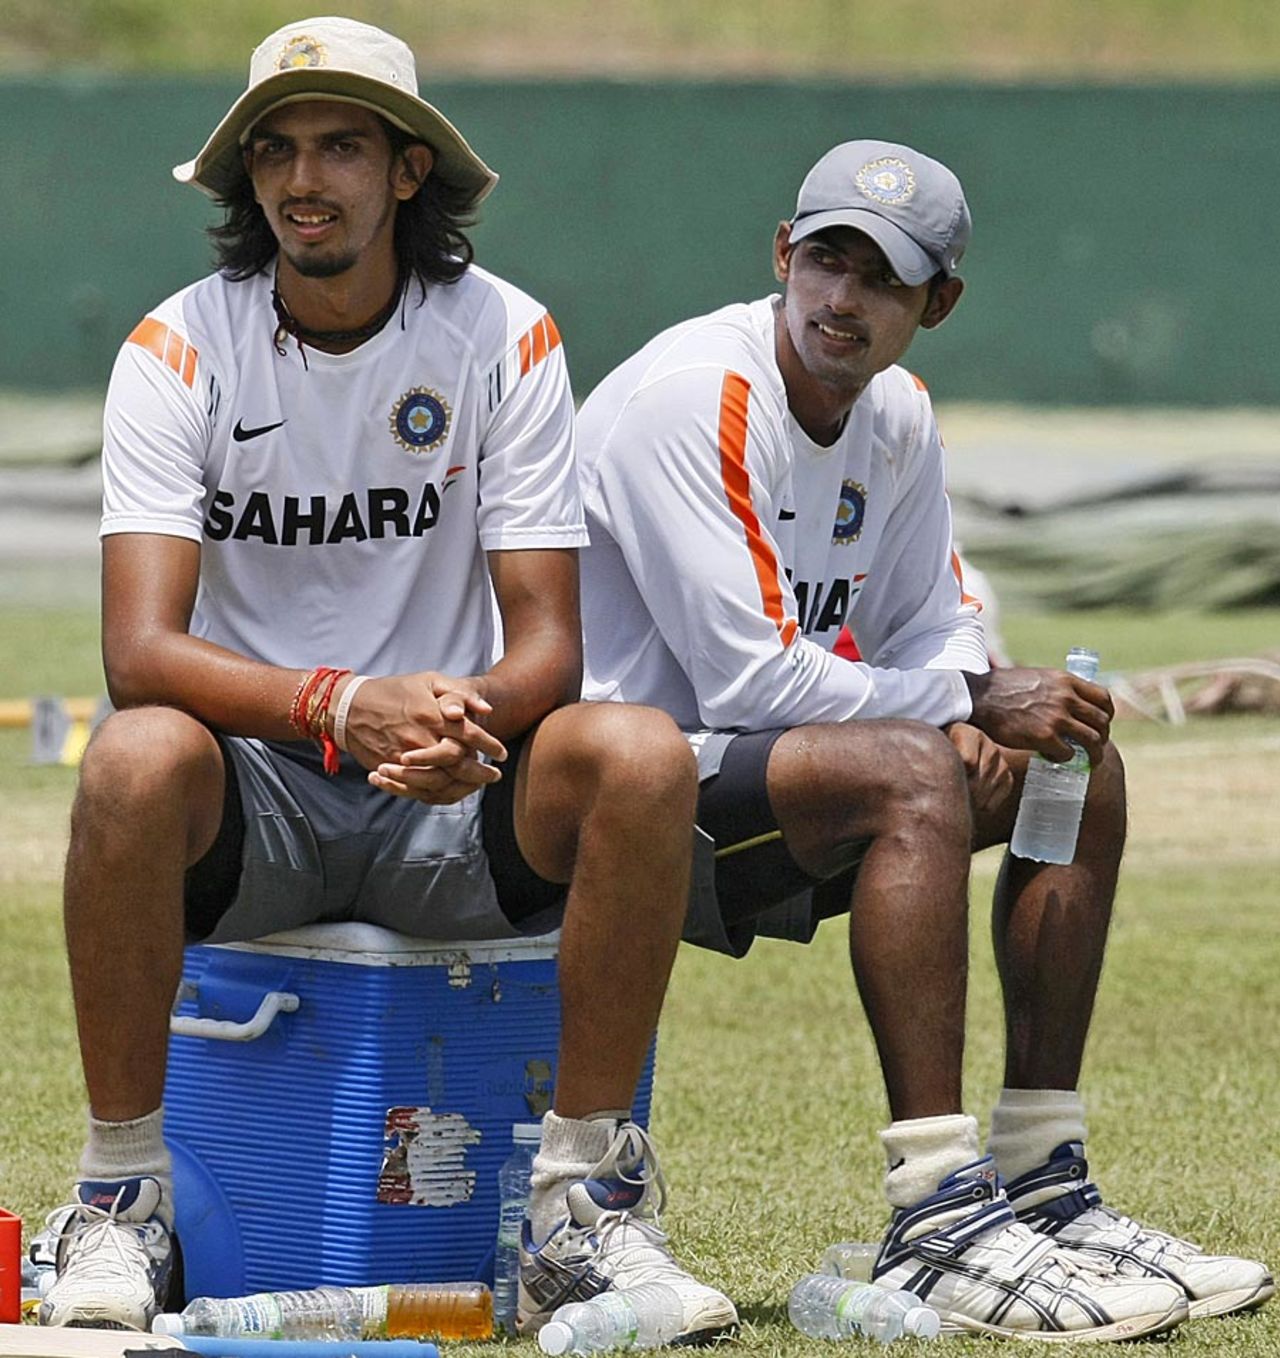 shant Sharma and Abhimanyu Mithun at the nets on the eve of the second Test, Colombo, July 25, 2010